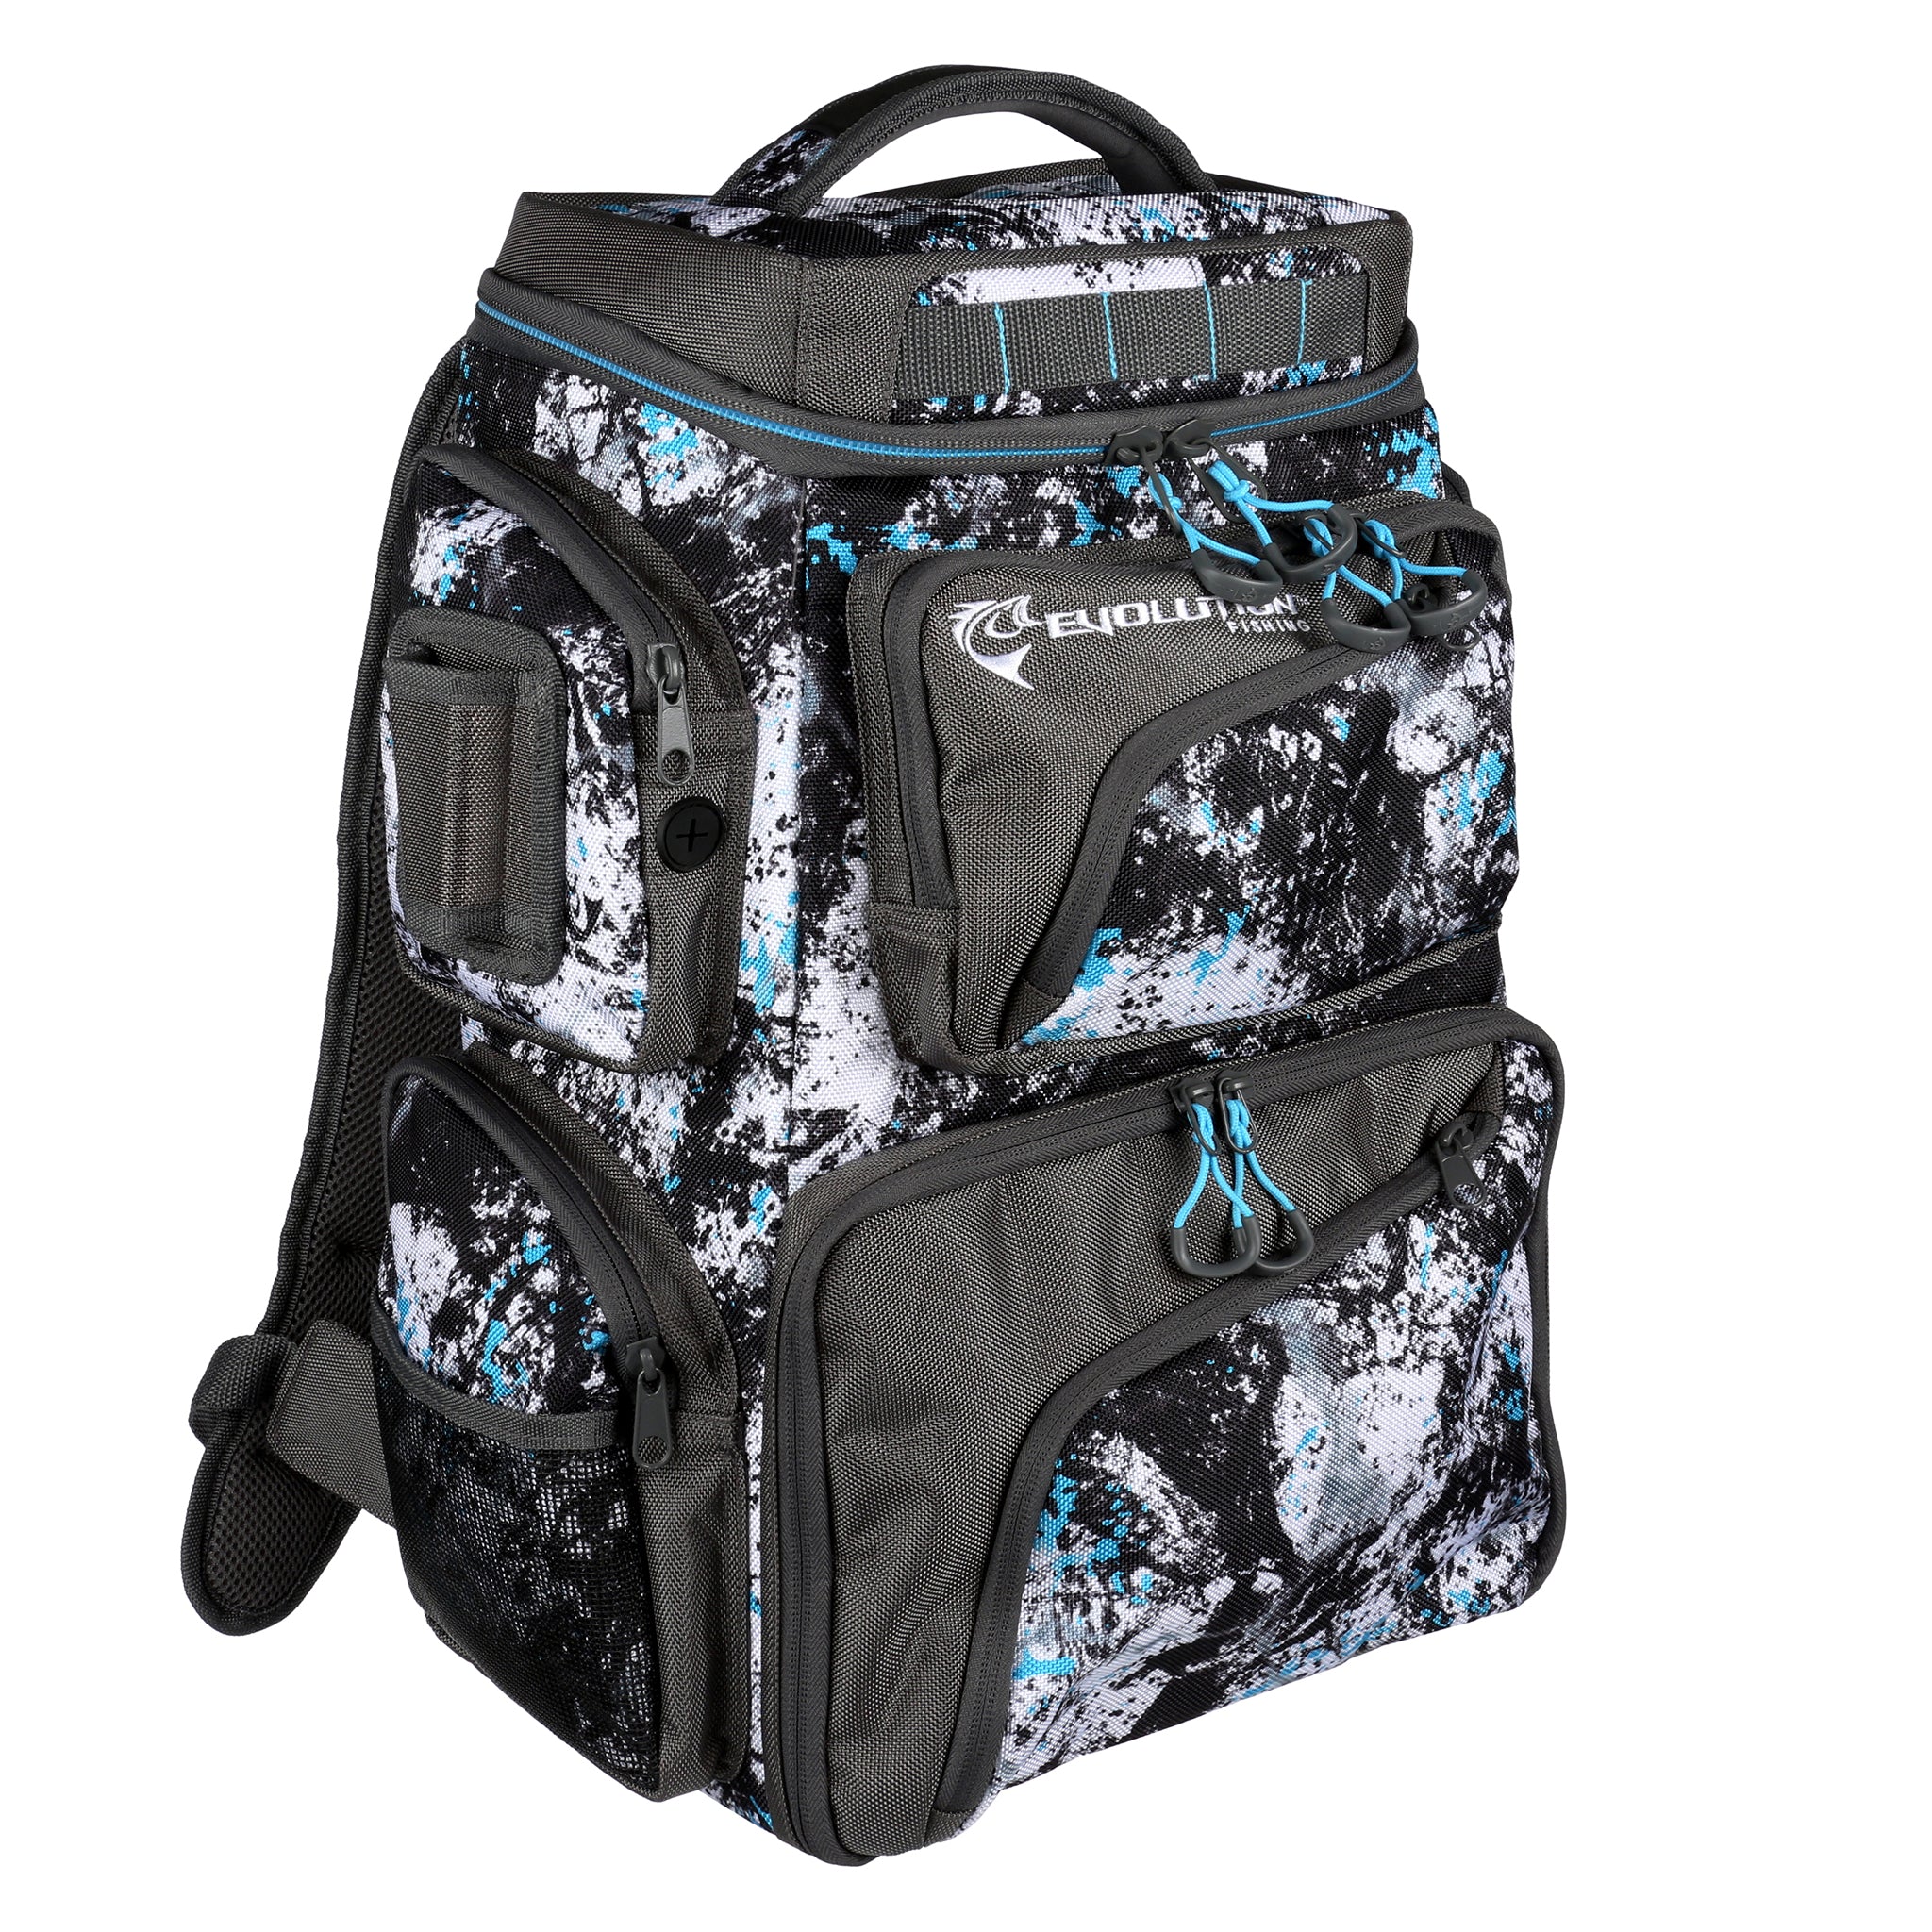 Bring large capacity and fully functional backpack to go fishing